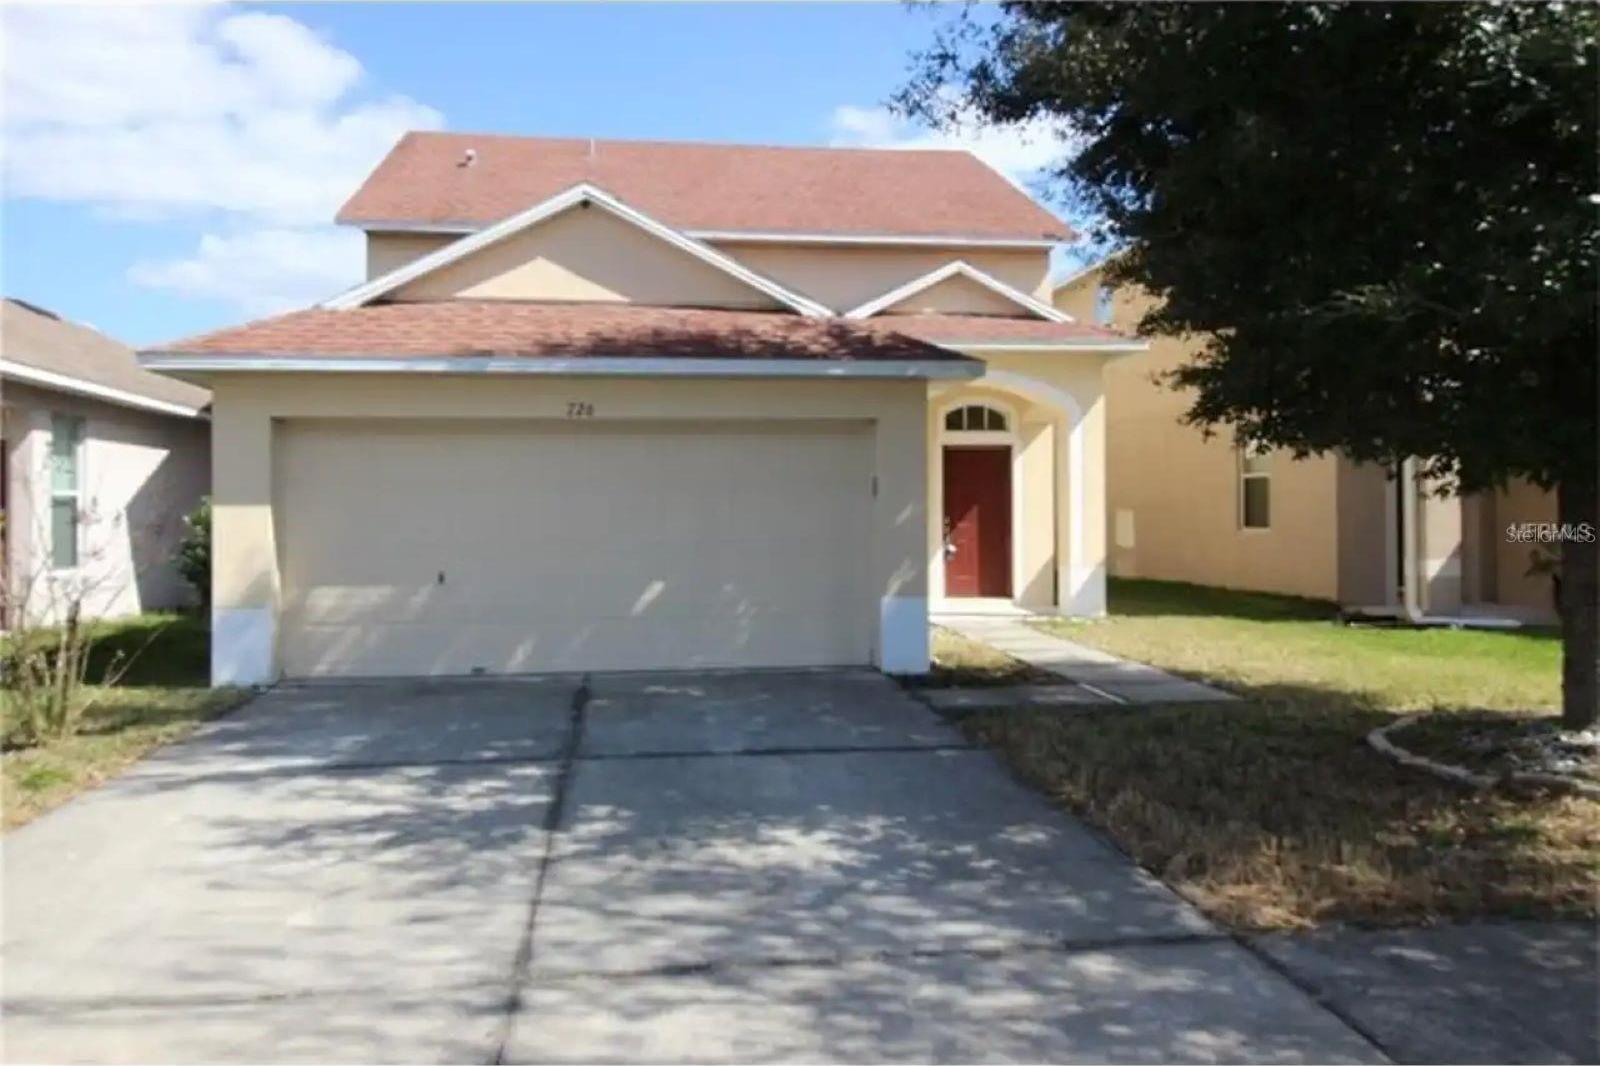 Photo one of 726 College Chase Dr Ruskin FL 33570 | MLS T3521843